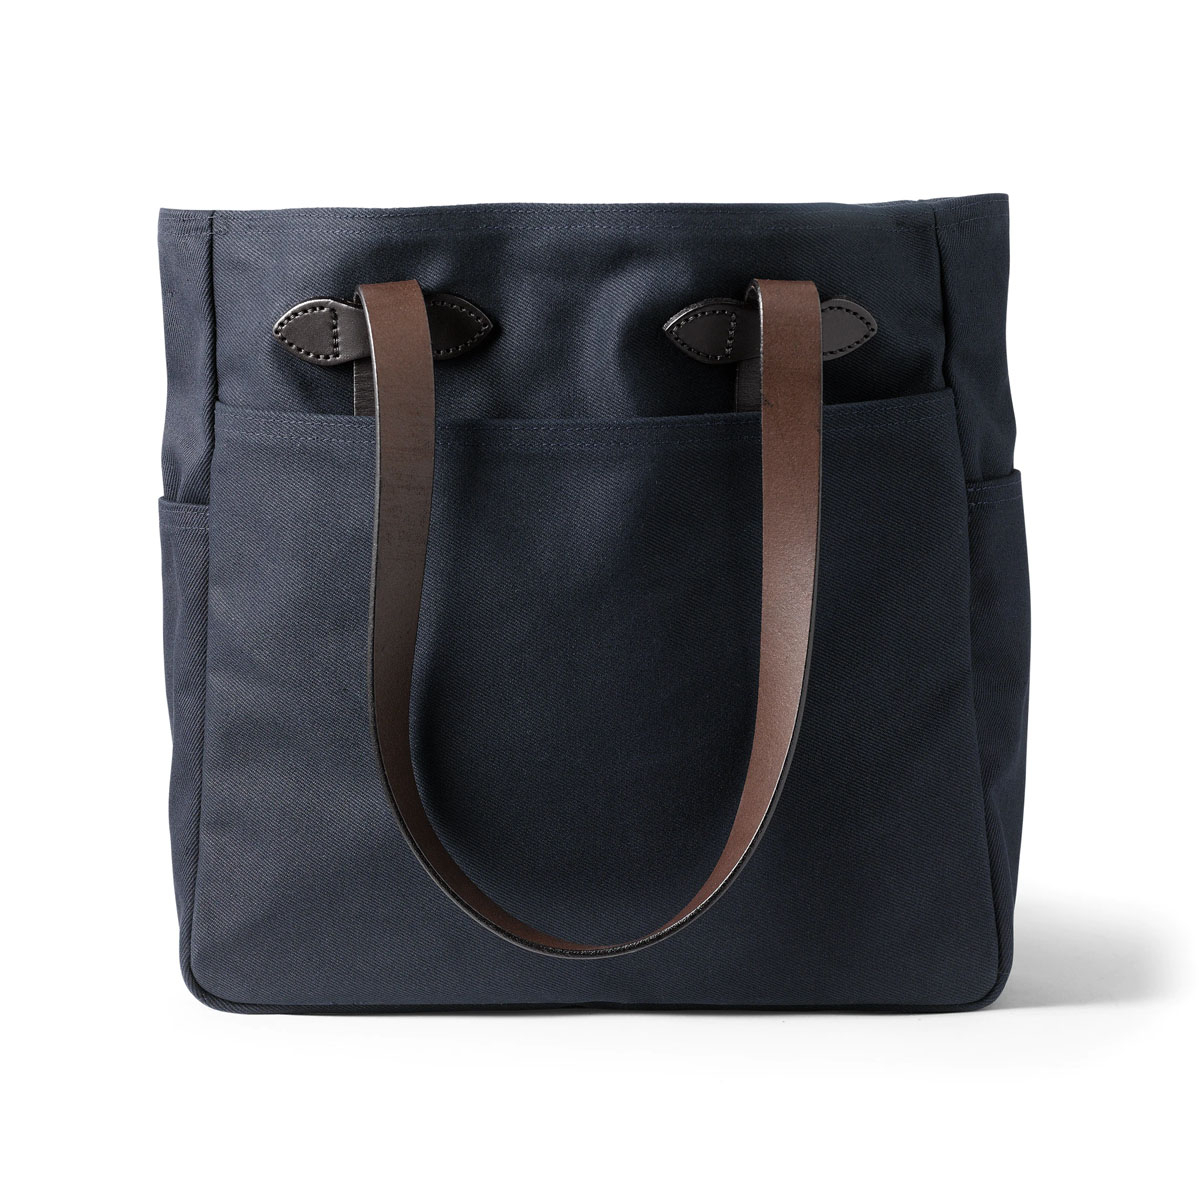 Filson Tote bag Navy, classic-looking shopper